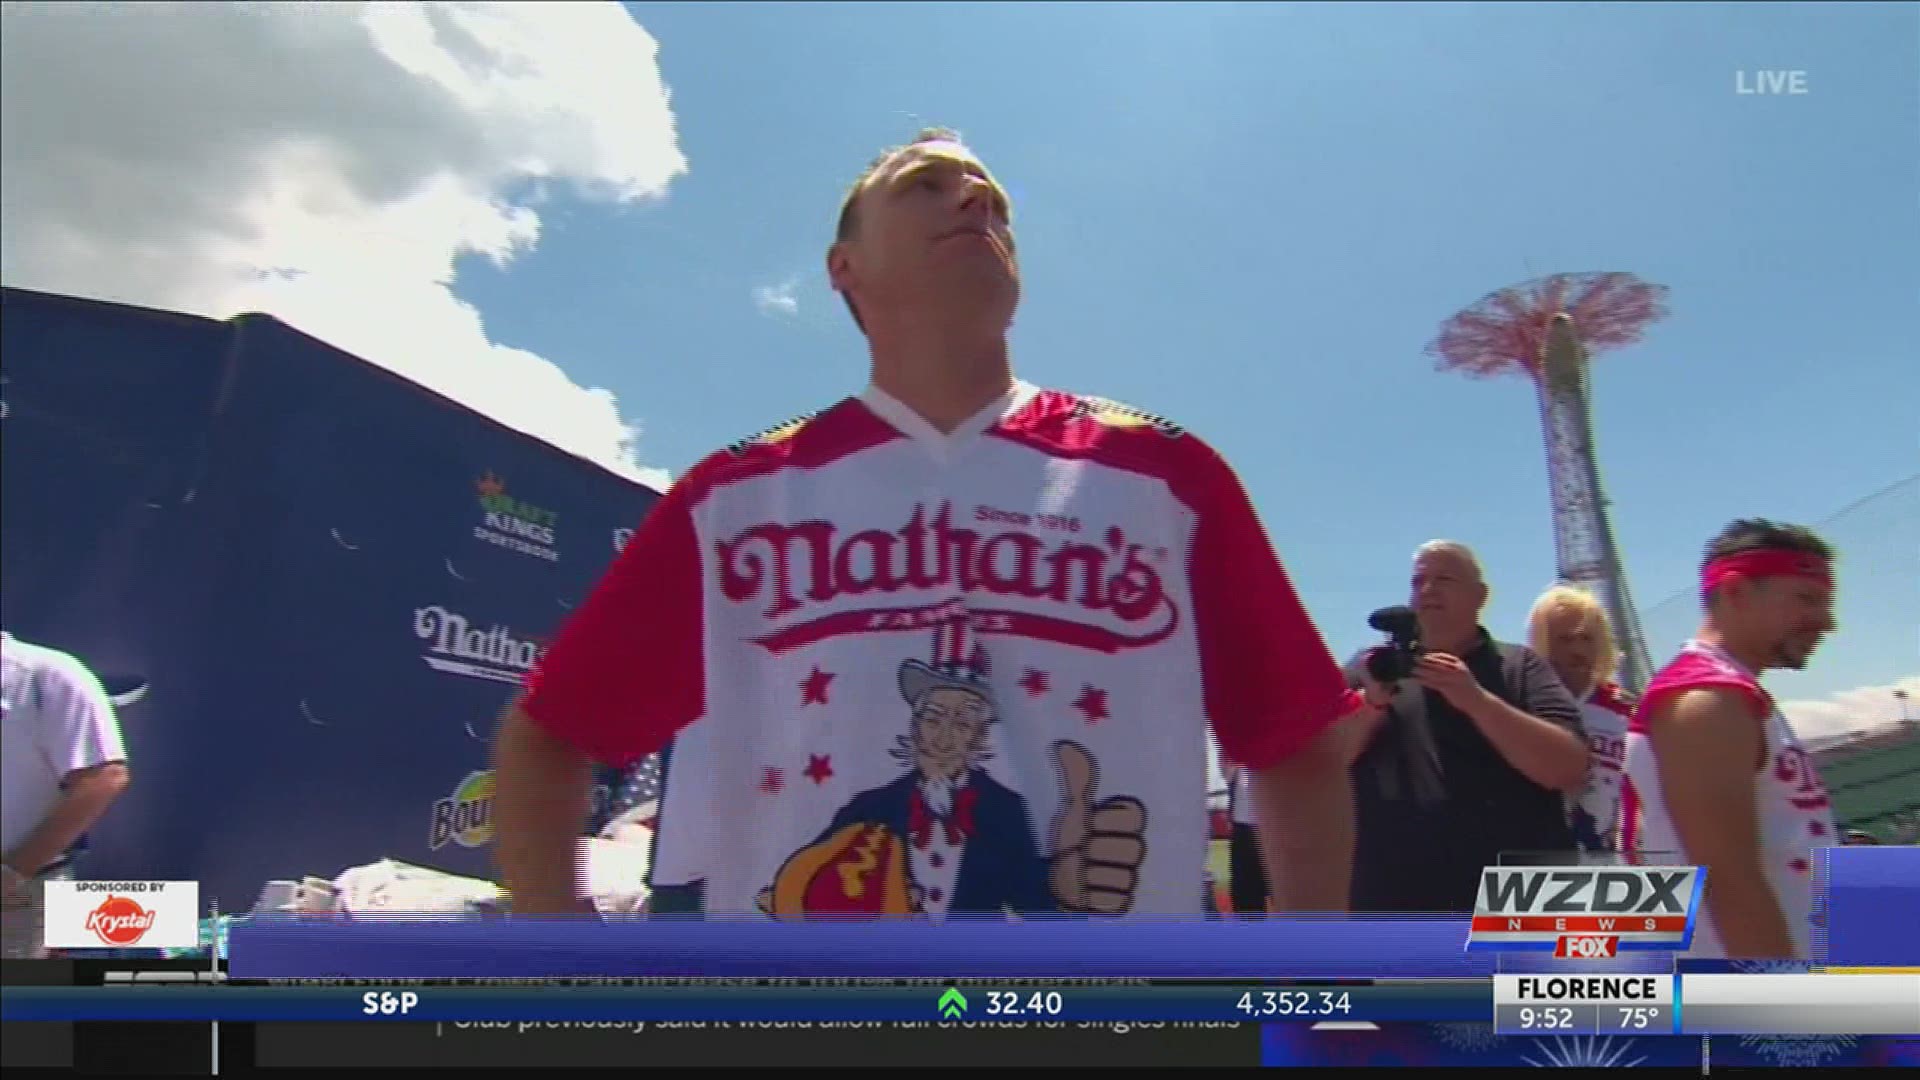 Chowdown champ Joey “Jaws” Chestnut broke his own record to gulp to a 14th win in the men’s Nathan’s Famous Hot Dog Eating Contest on Sunday